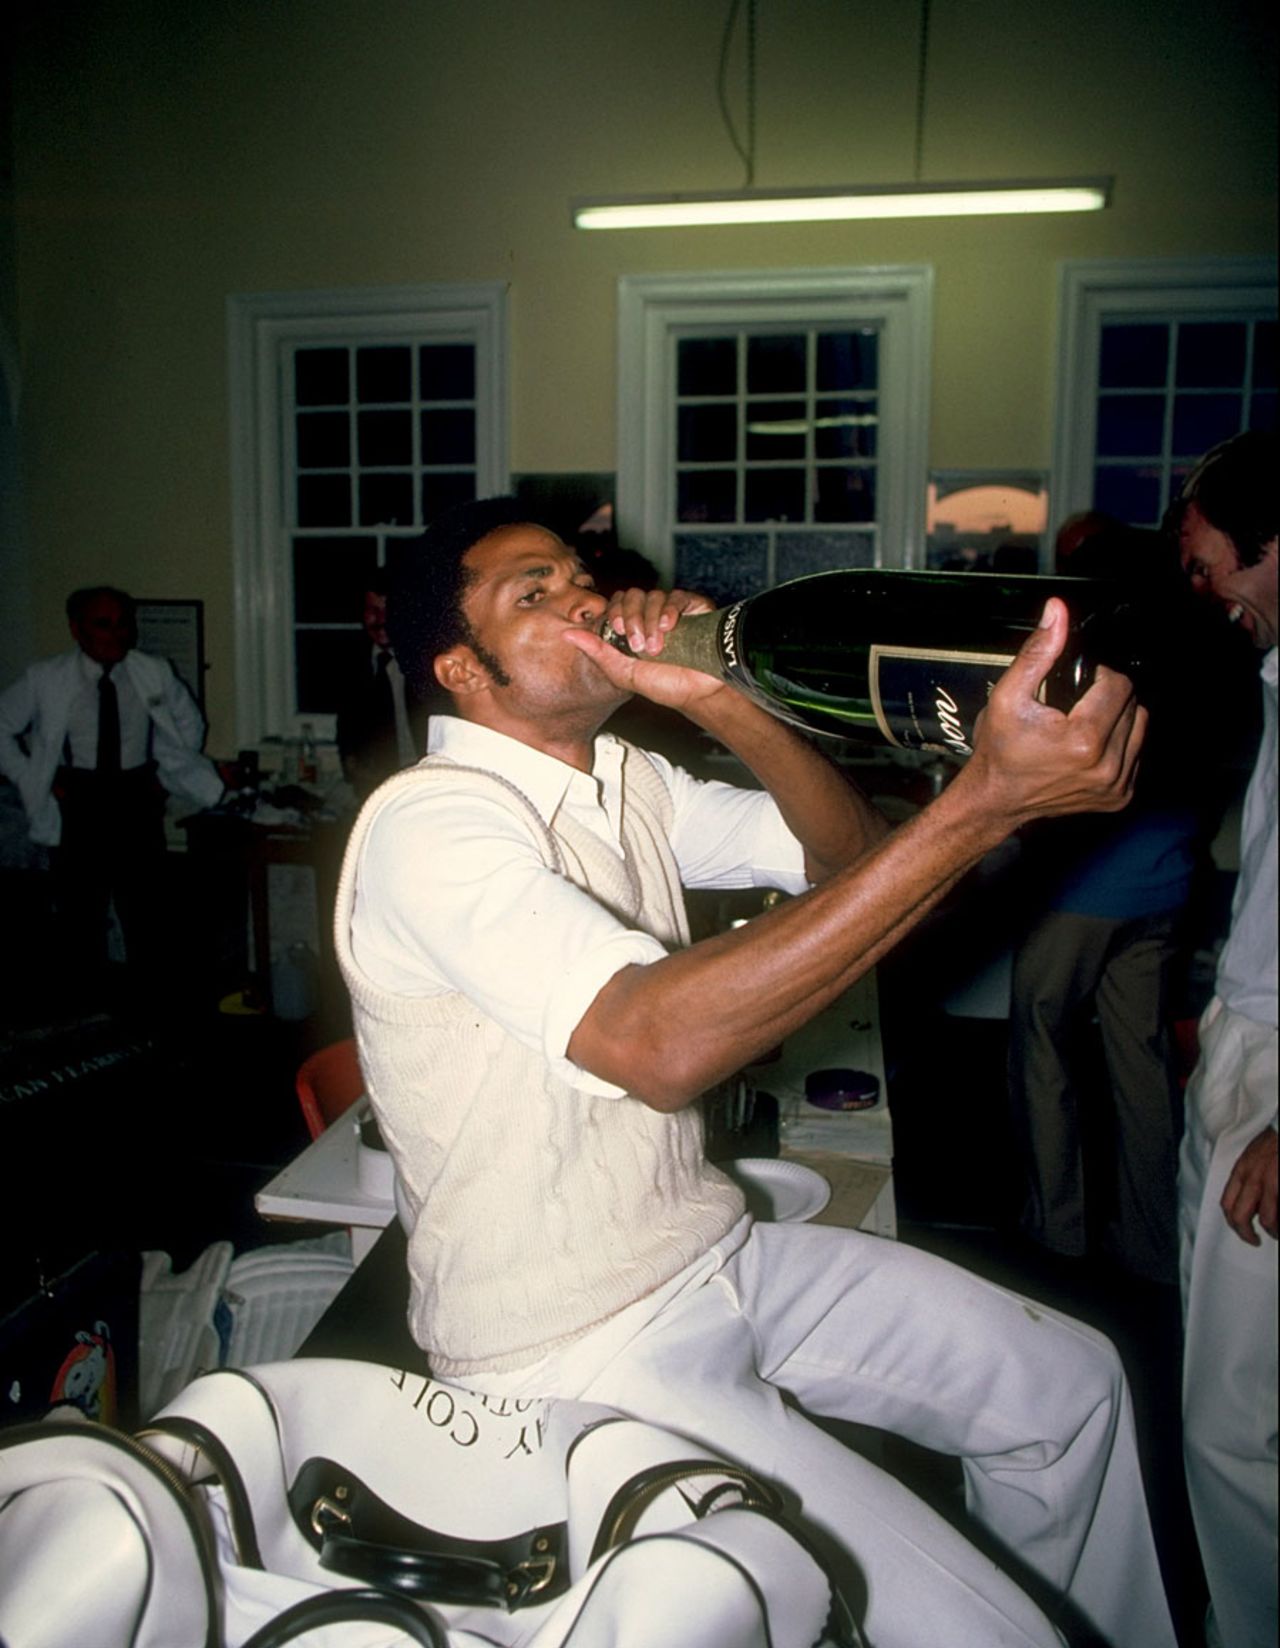 Norbert Phillips drinks champagne after a match, 1980